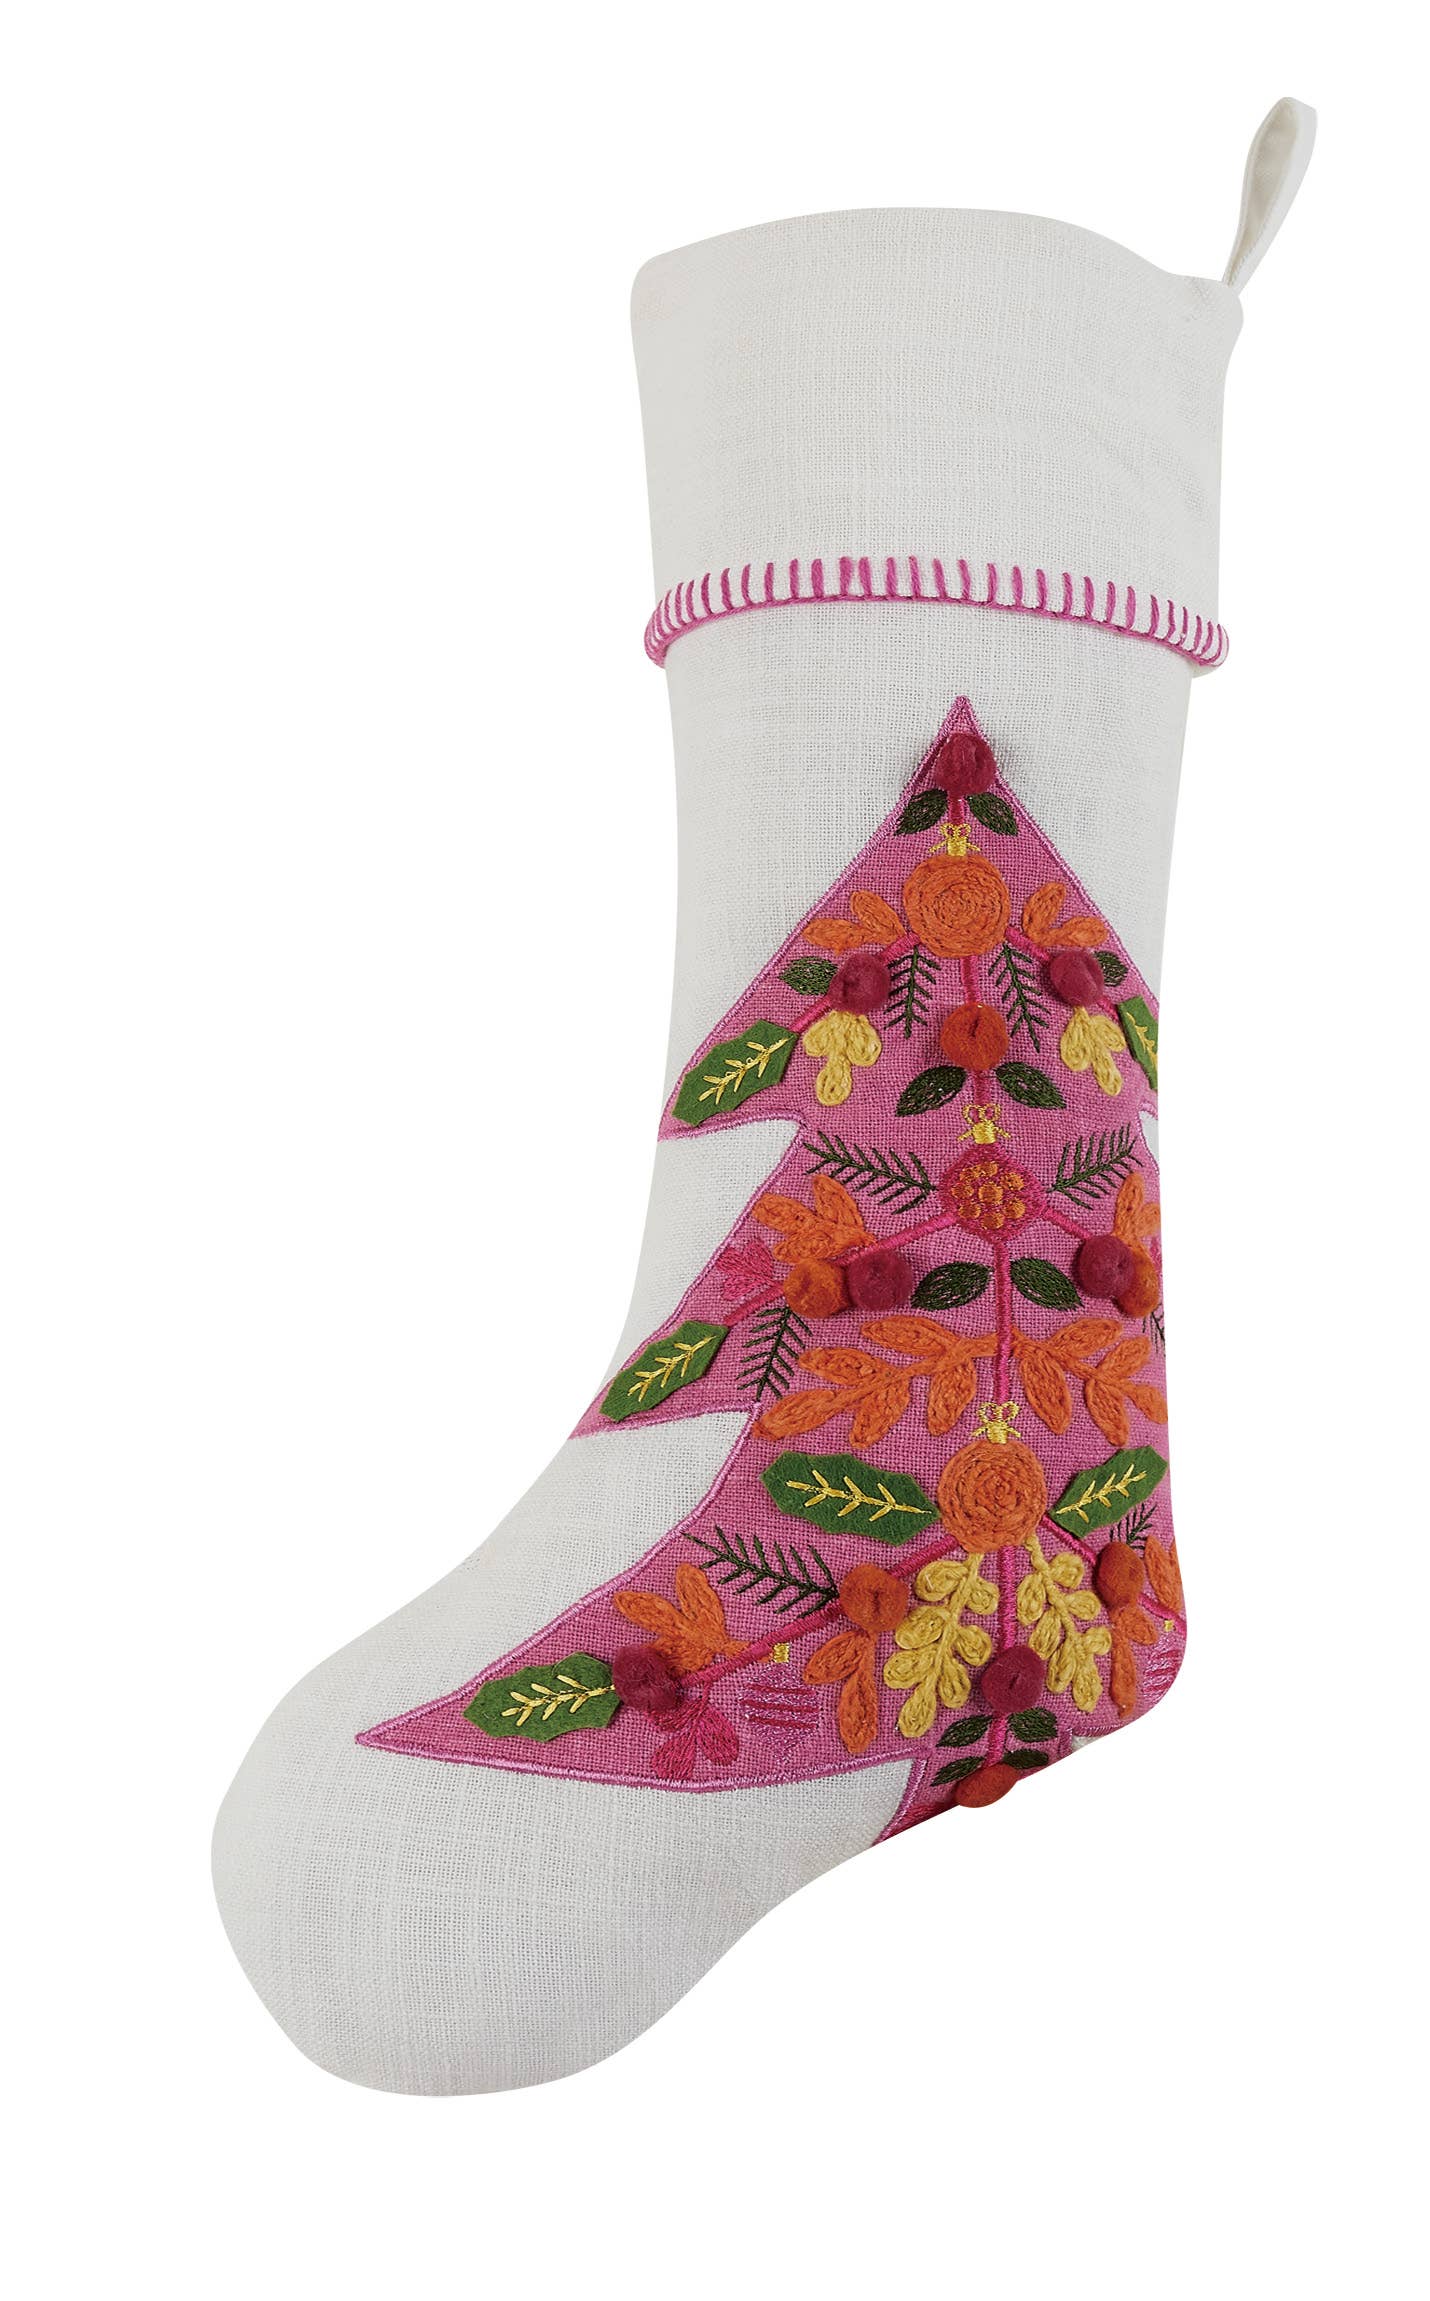 Merry Tree Embroidered Stocking